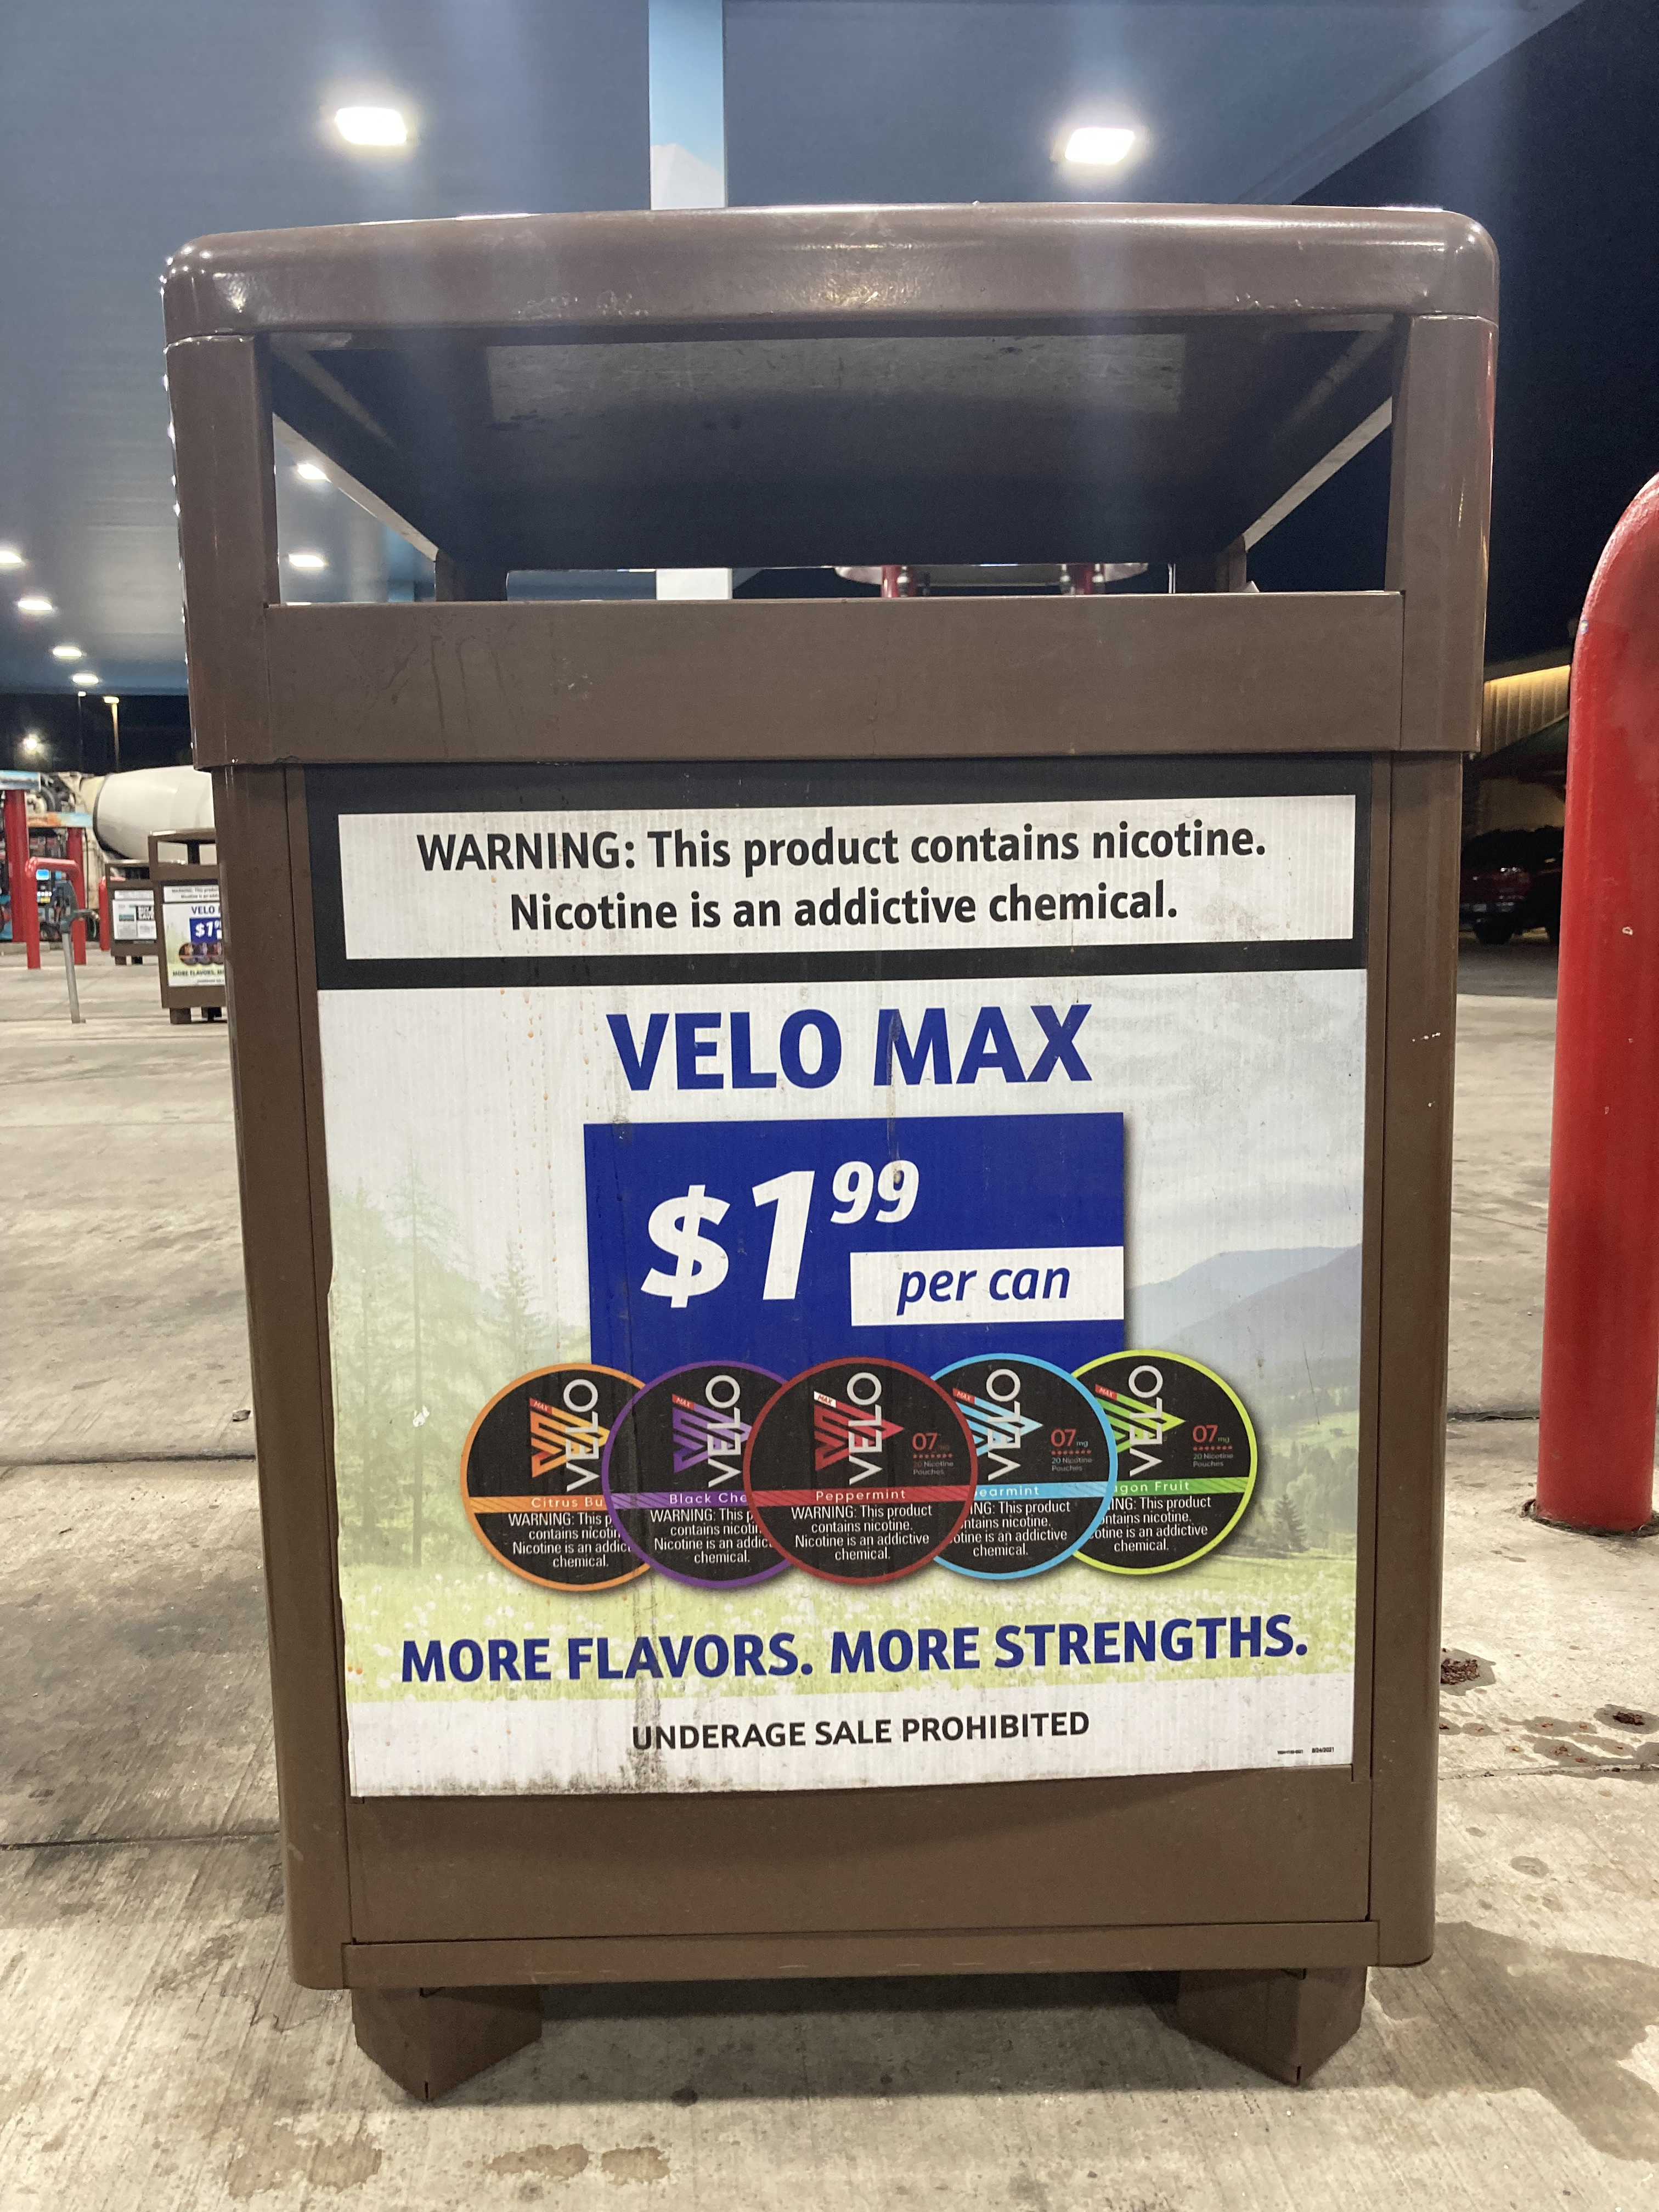 Ad for Velo Max nicotine pouches on a trash can outside at a gas station